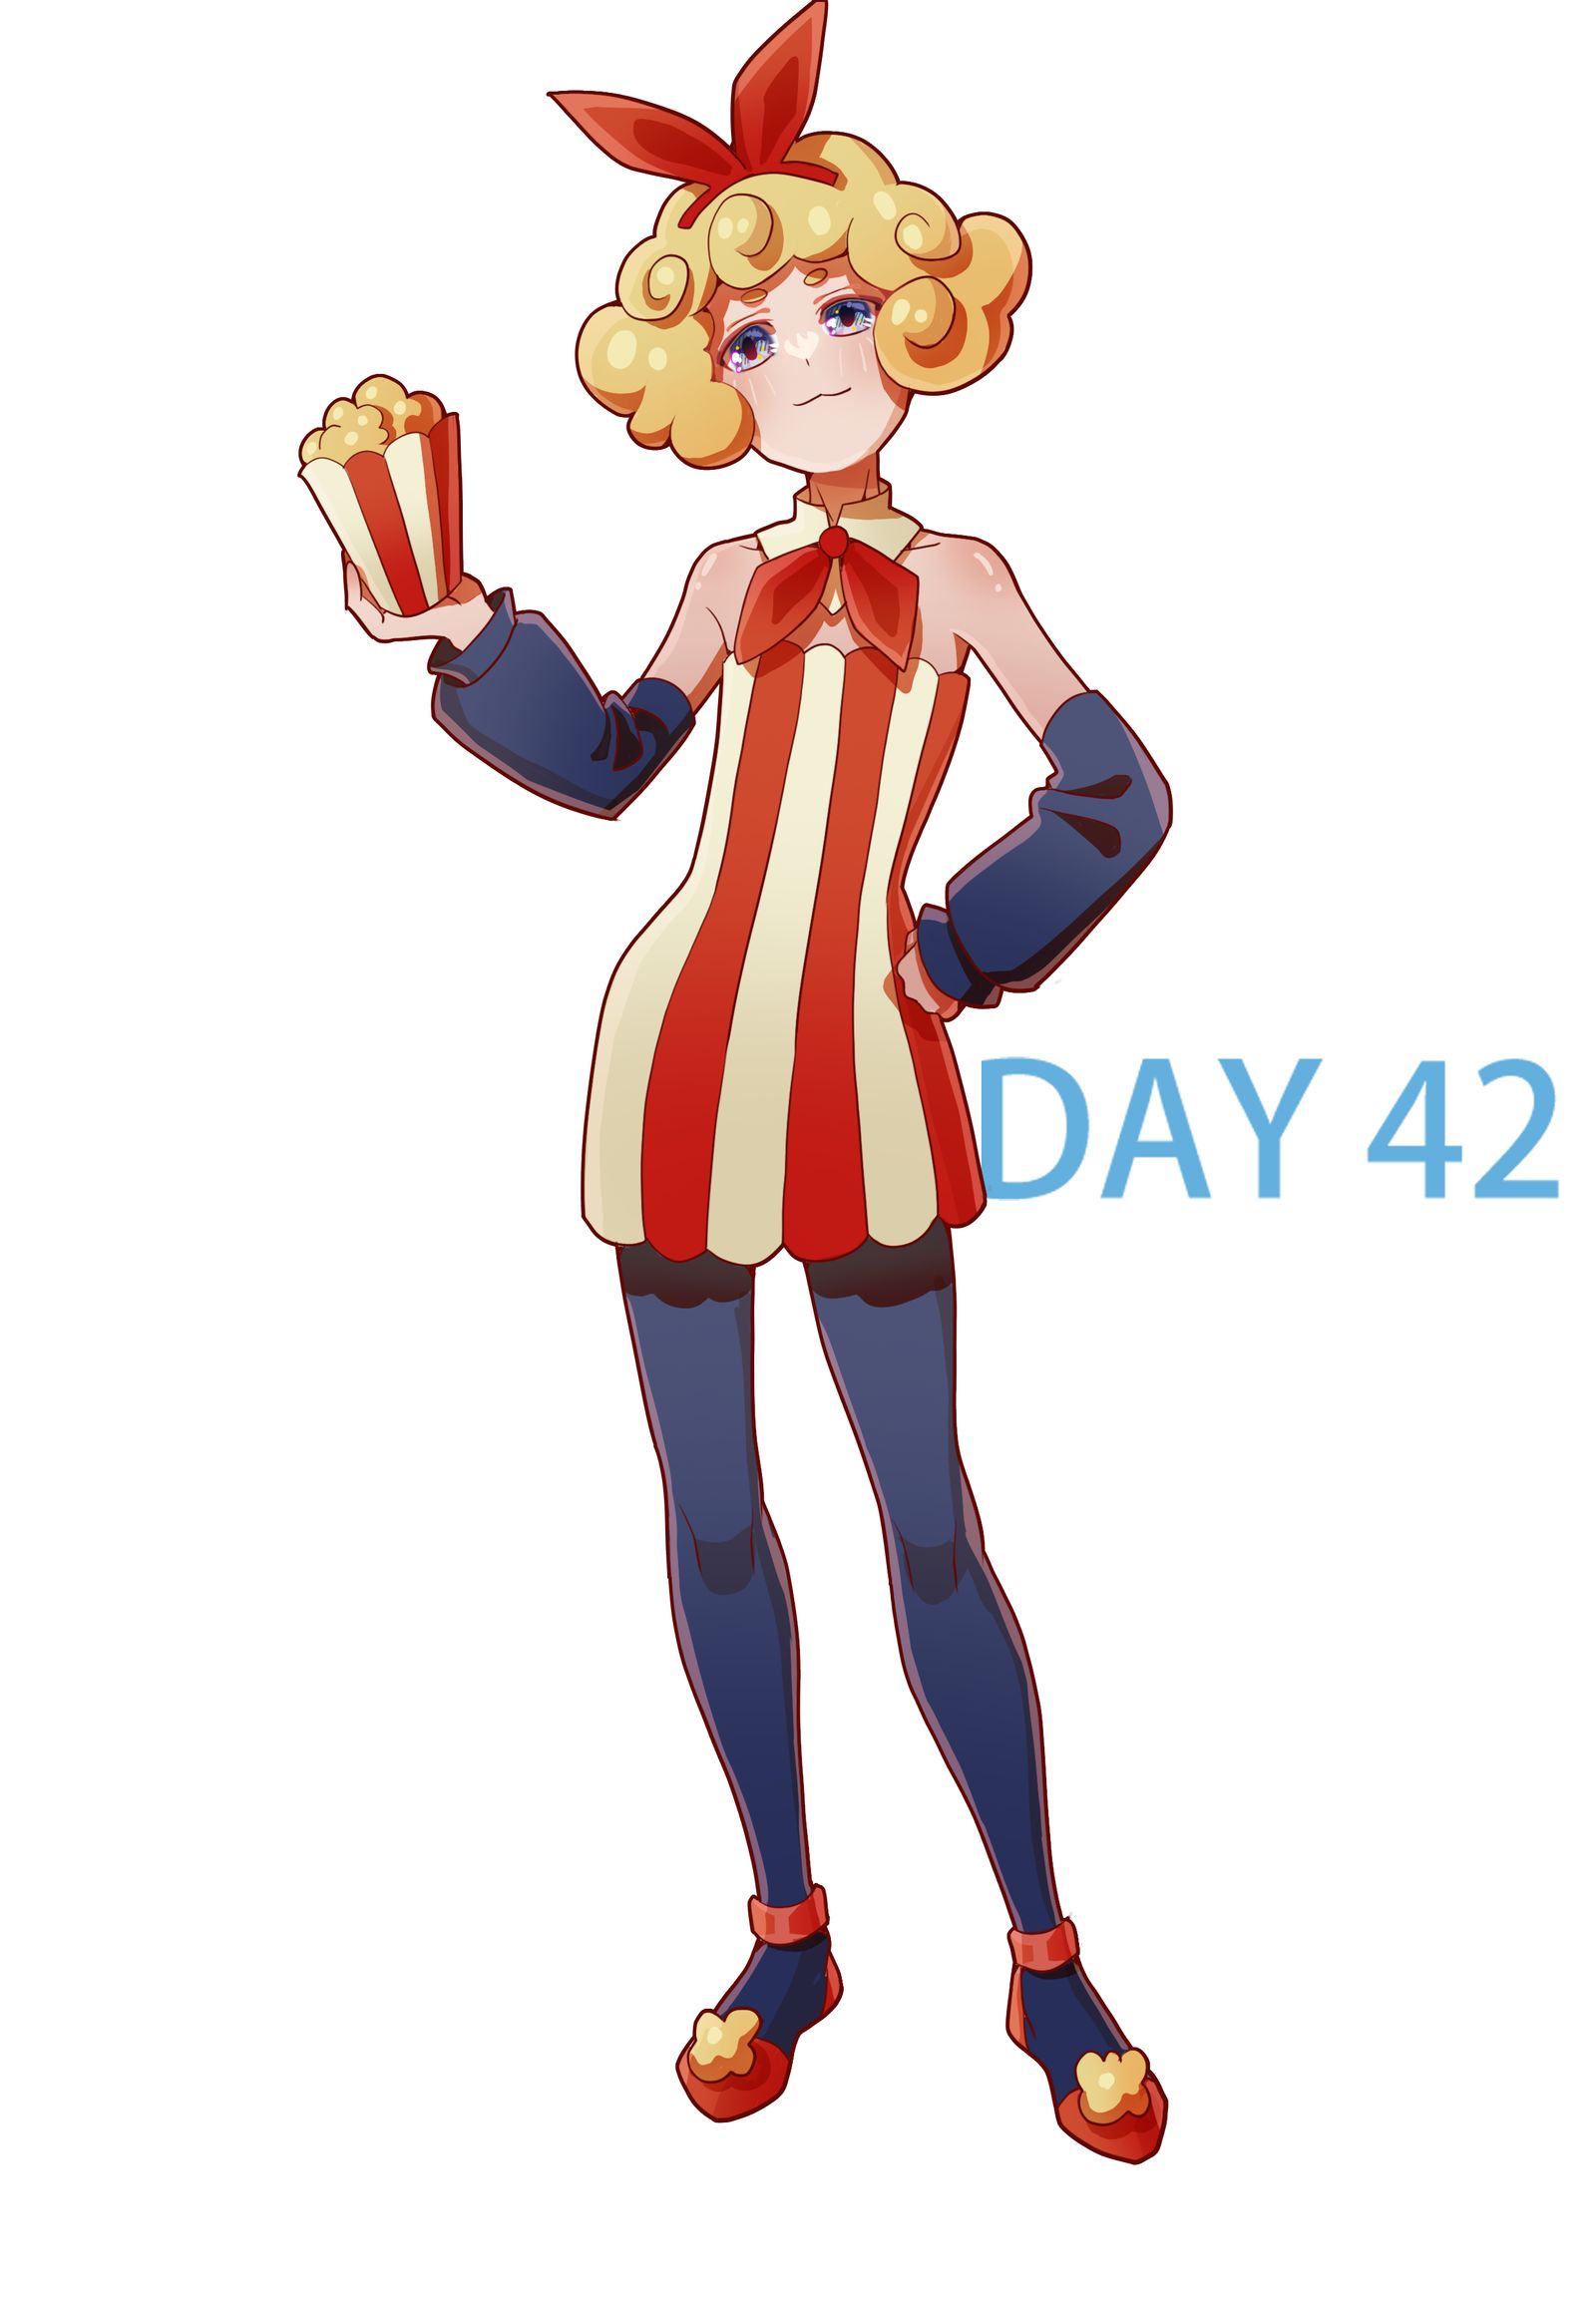 DAY42